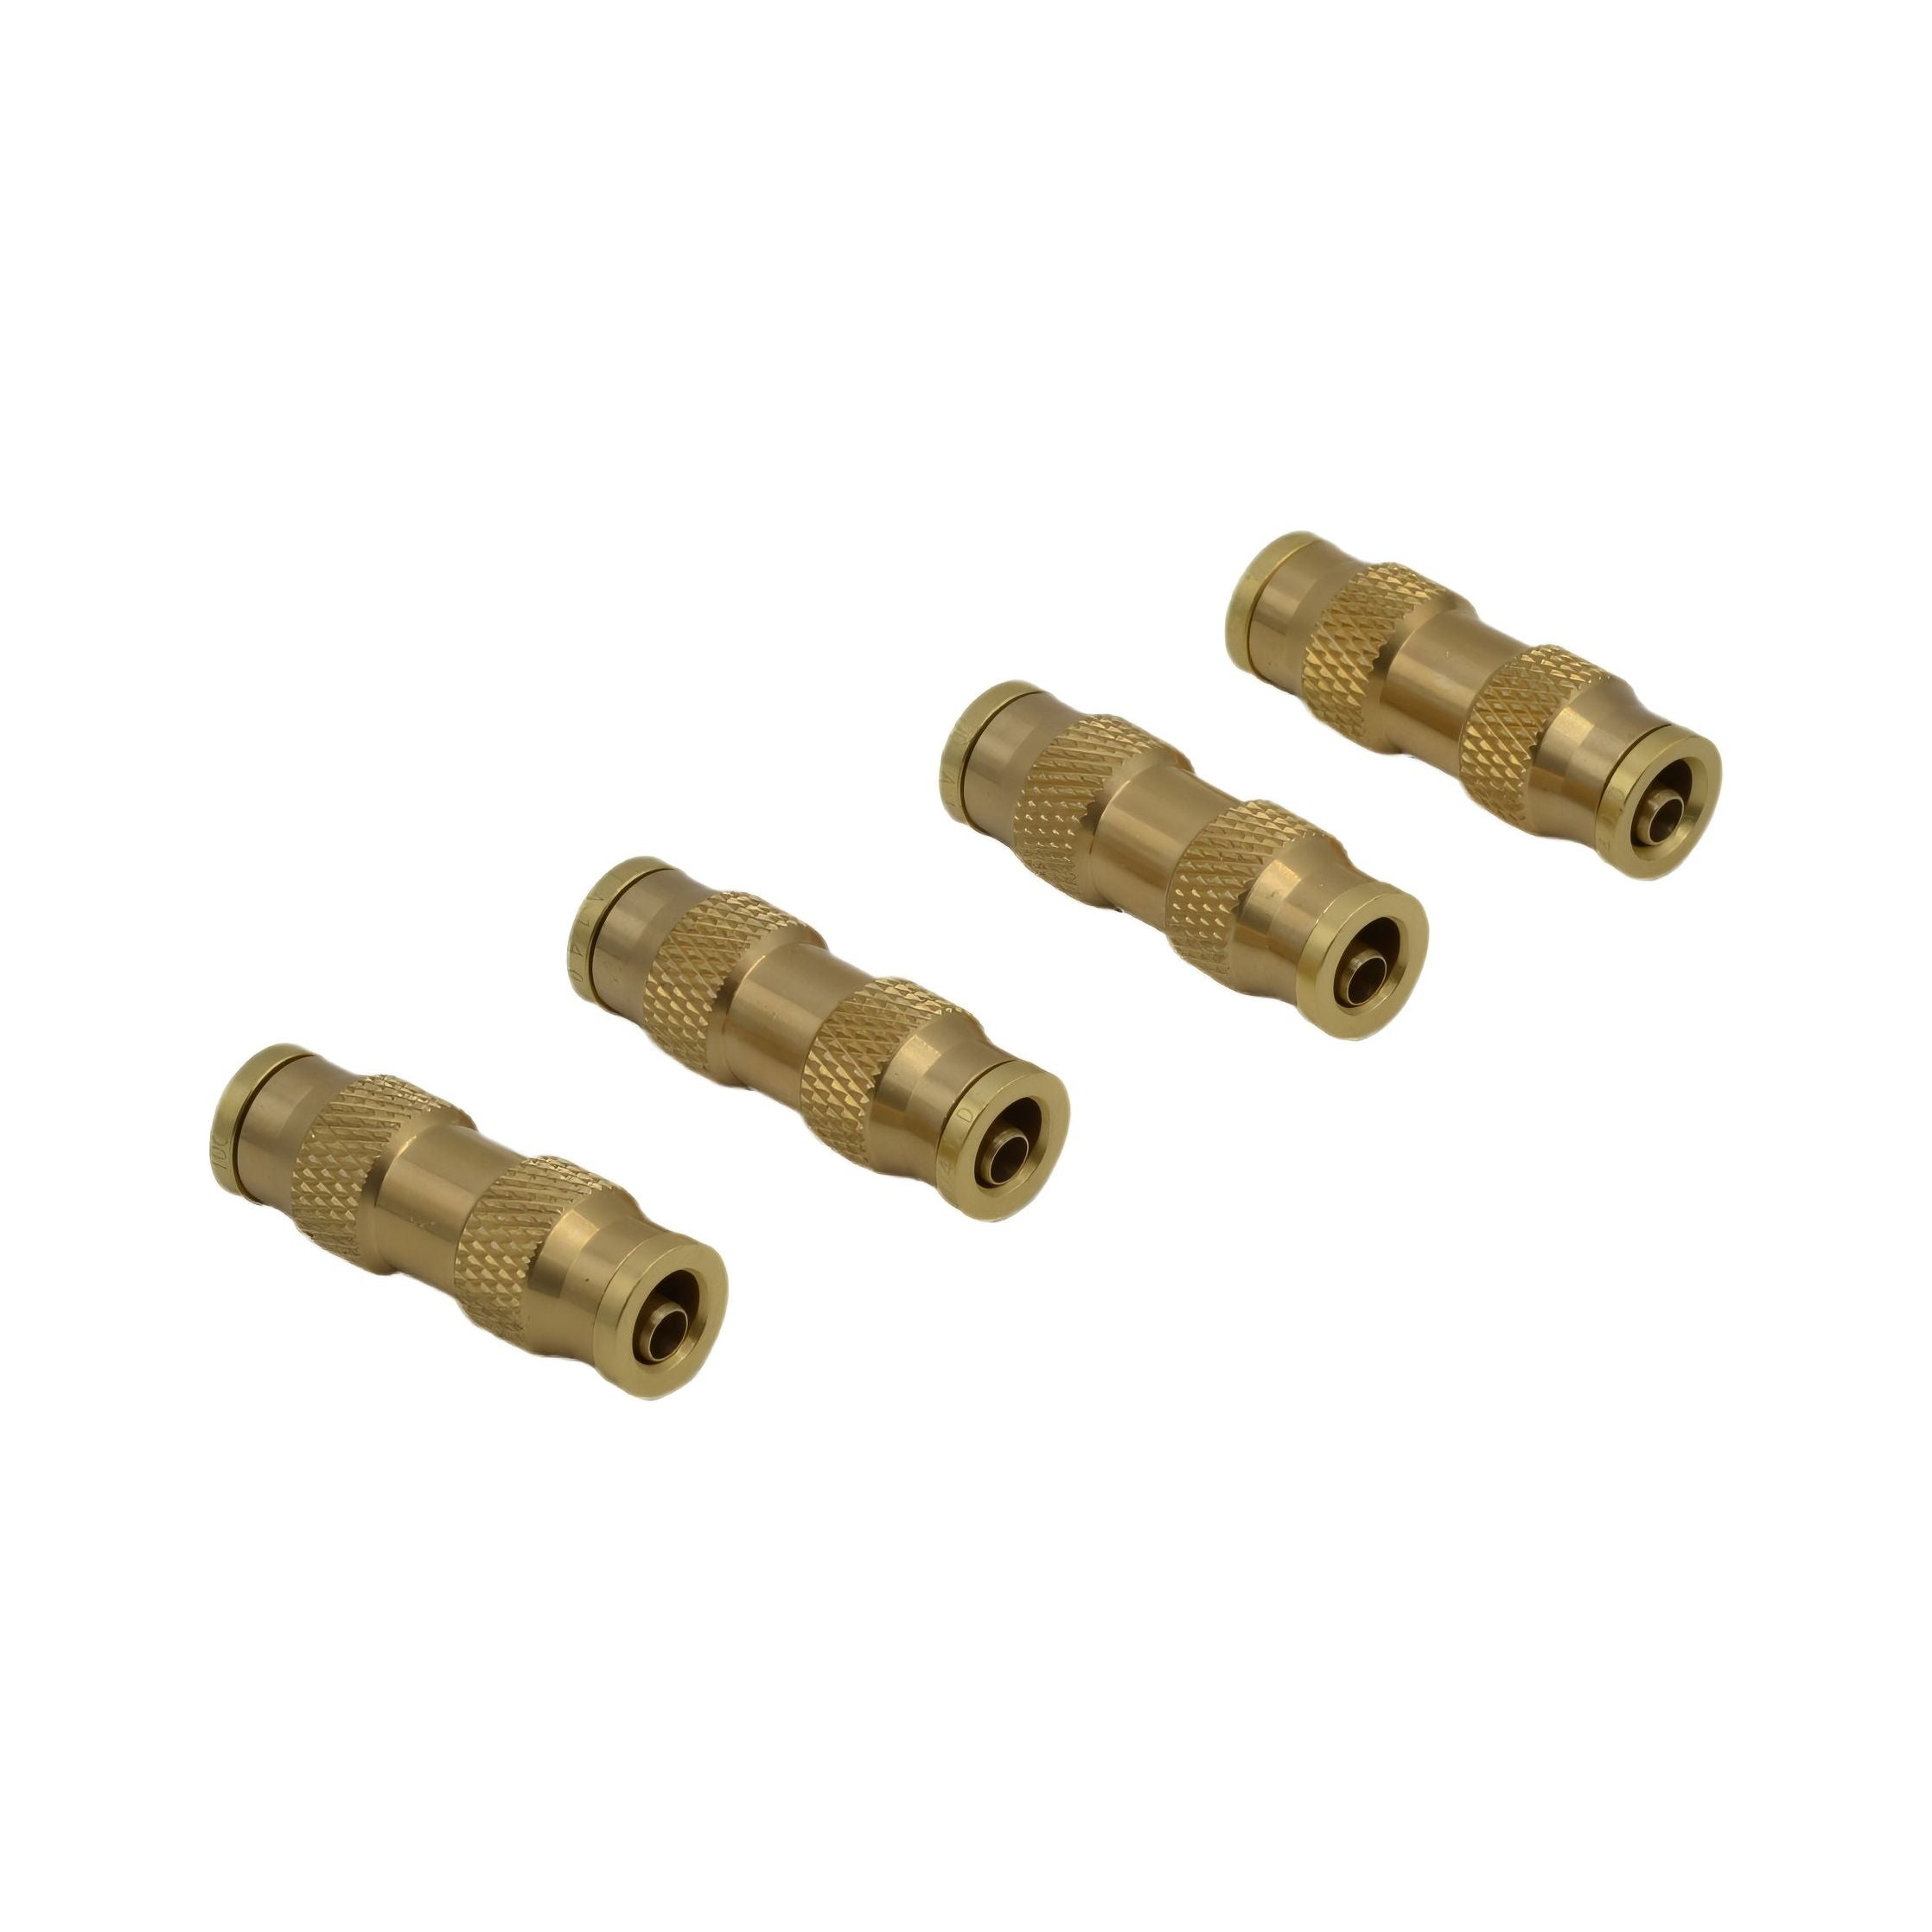 4 Piece 1/4 DOT Straight Brass Push in Hose Connect Grab Kit Assortment